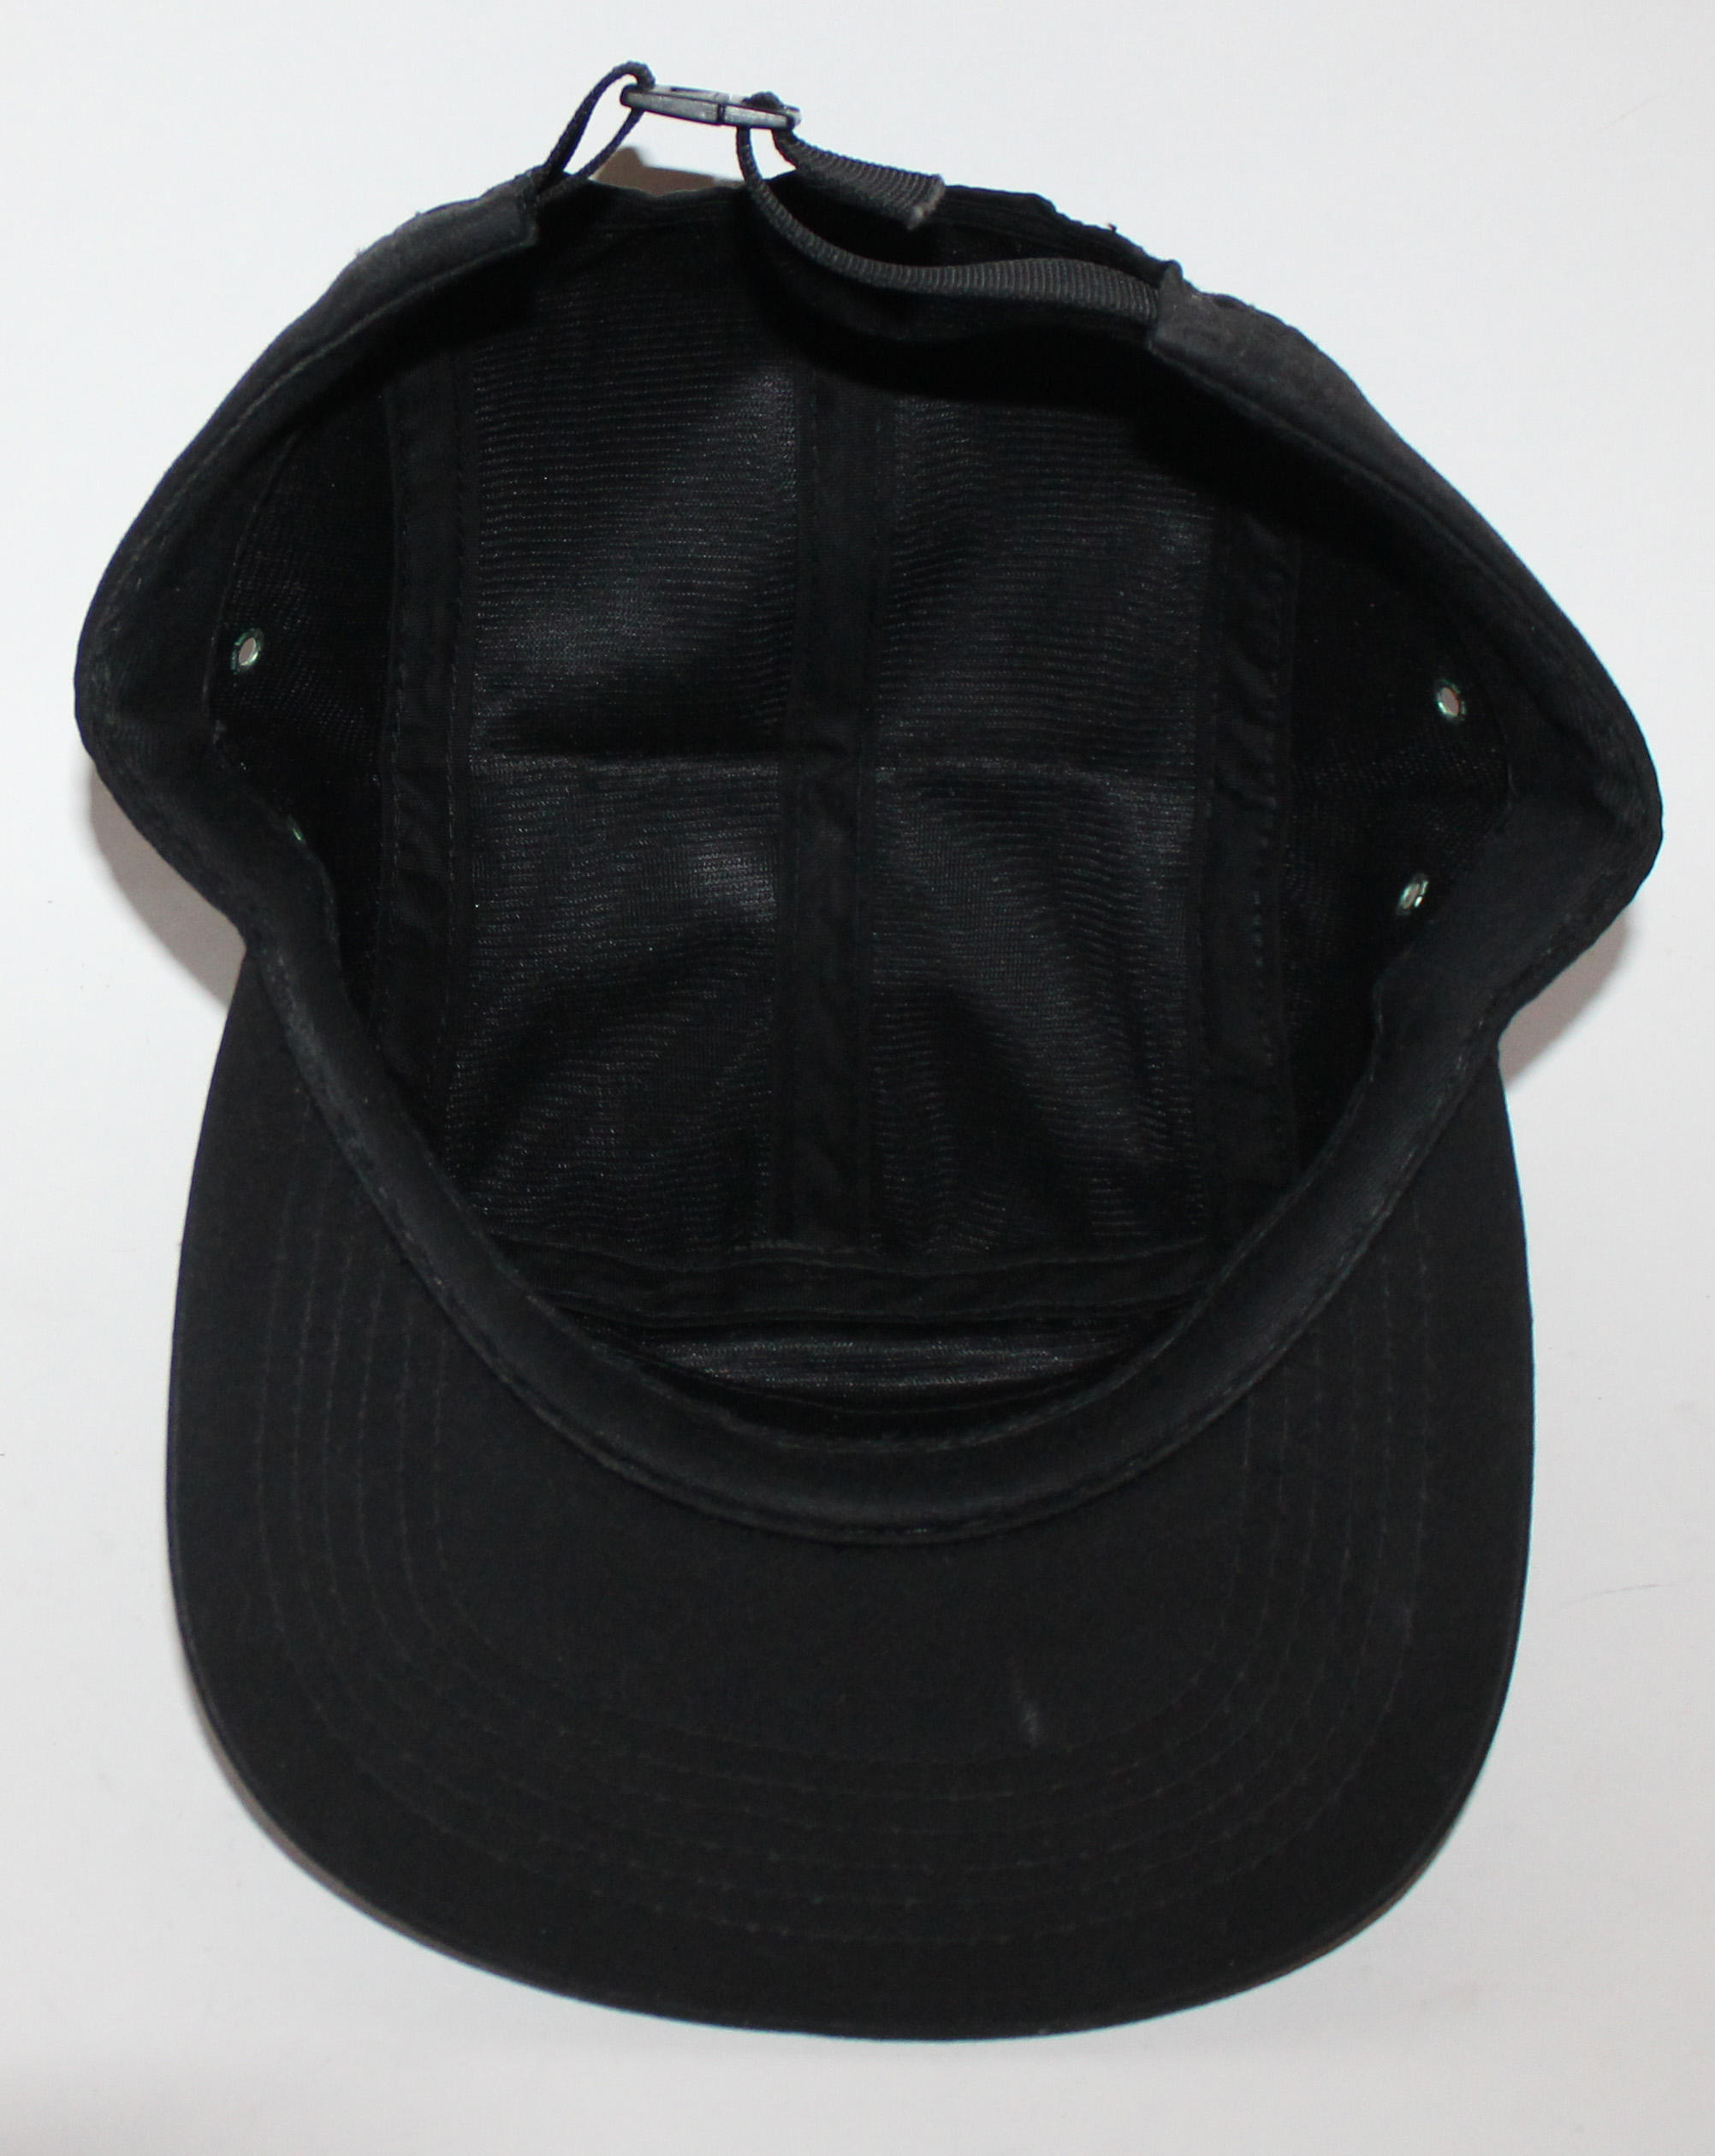 Supreme Black 5 Panel Ripstop Camp Hat F/W 10 — Roots